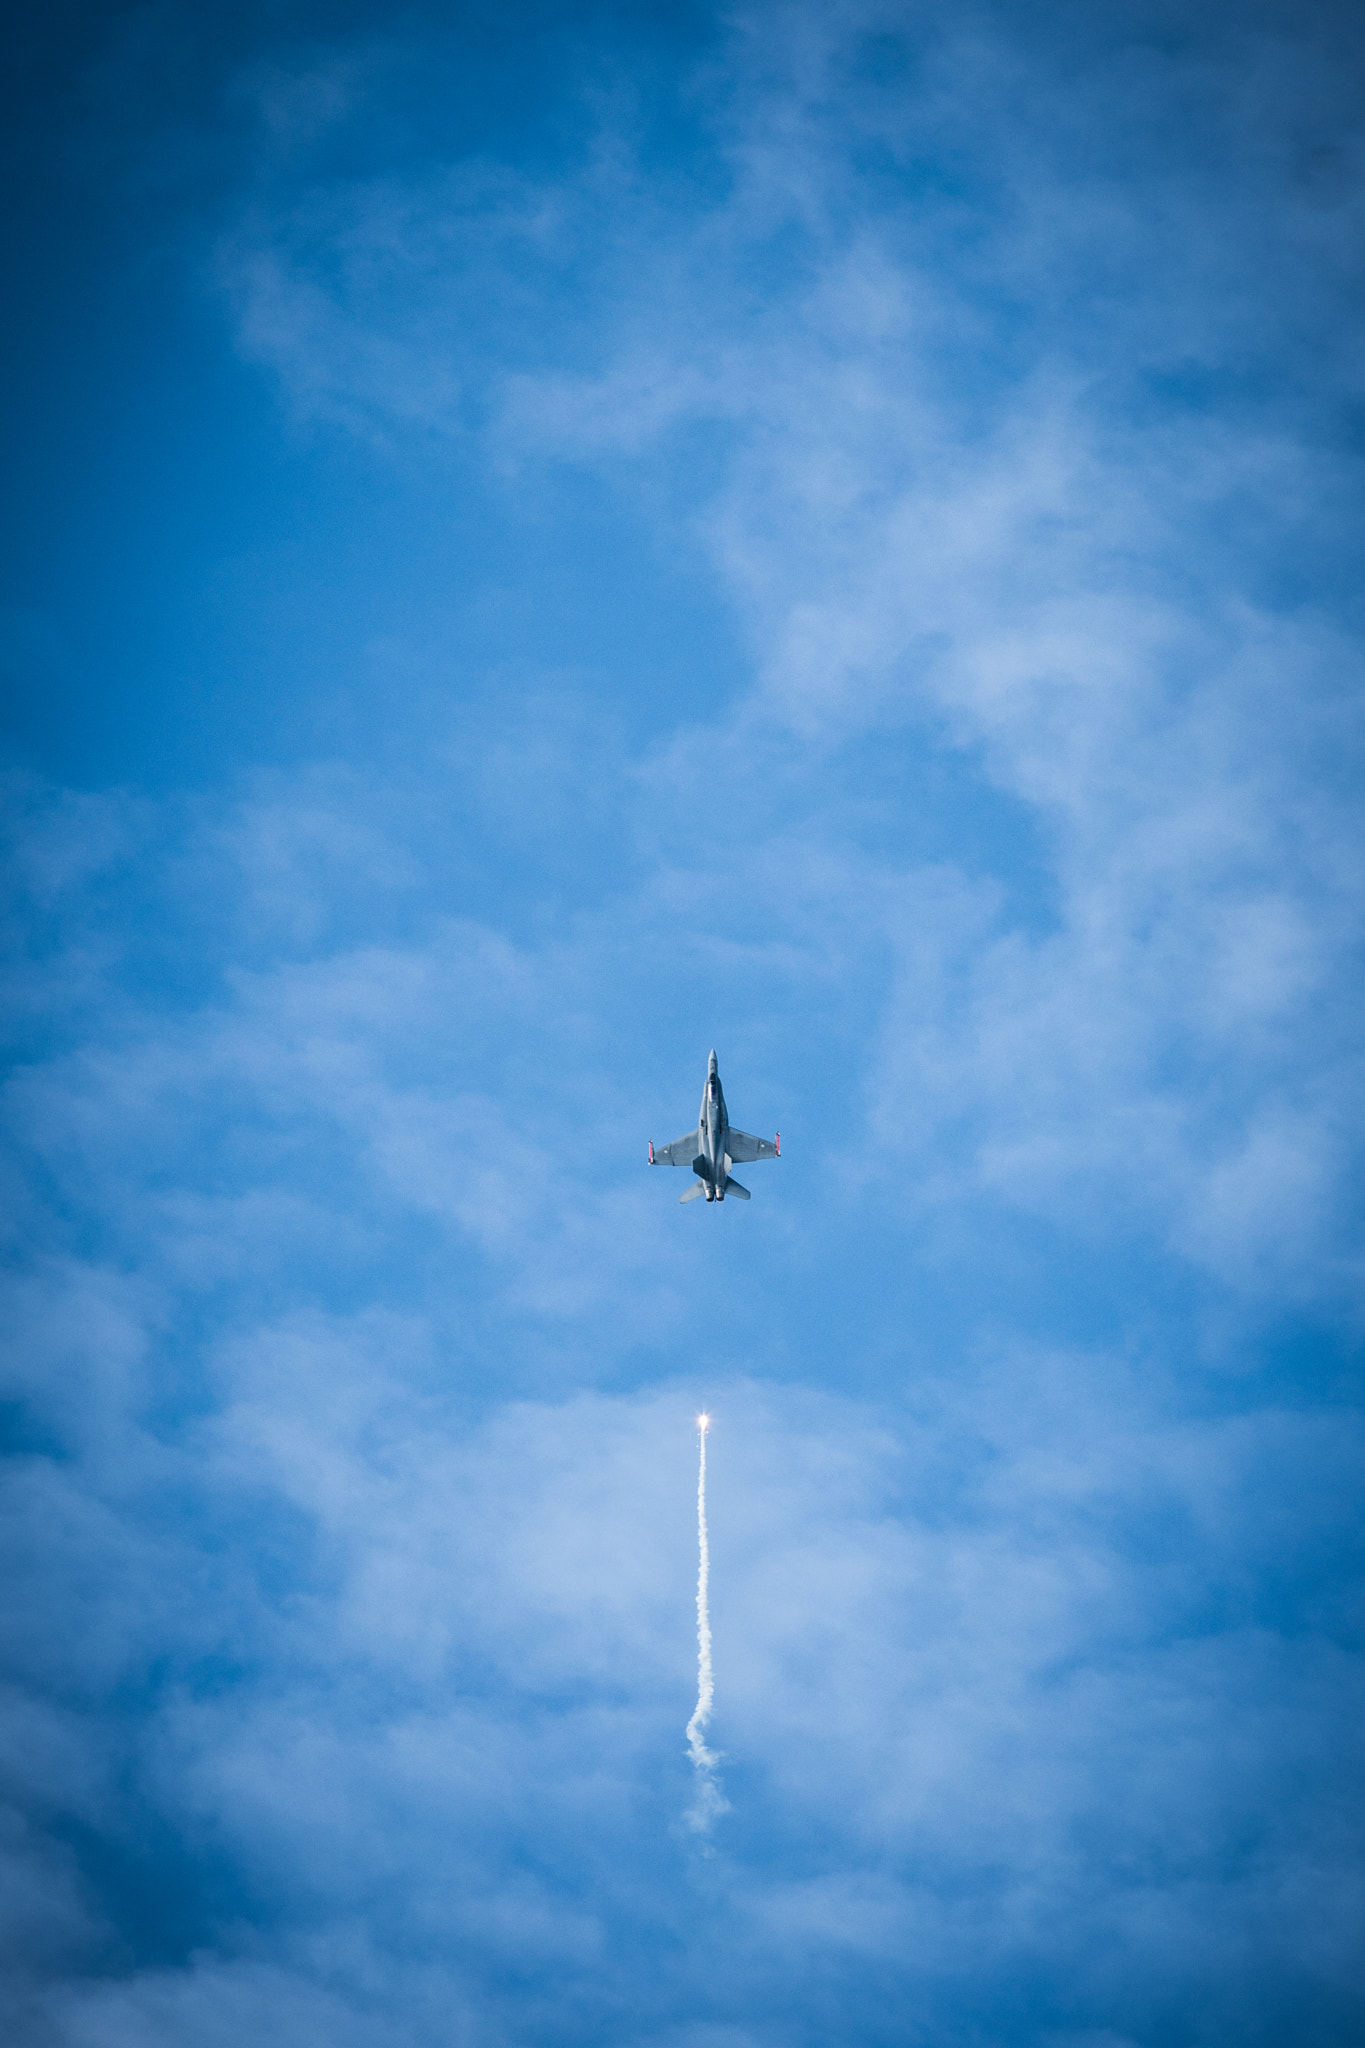 Sony a6300 + Canon EF 200mm F2.8L II USM sample photo. F/a-18 hornet, dropping a flare photography